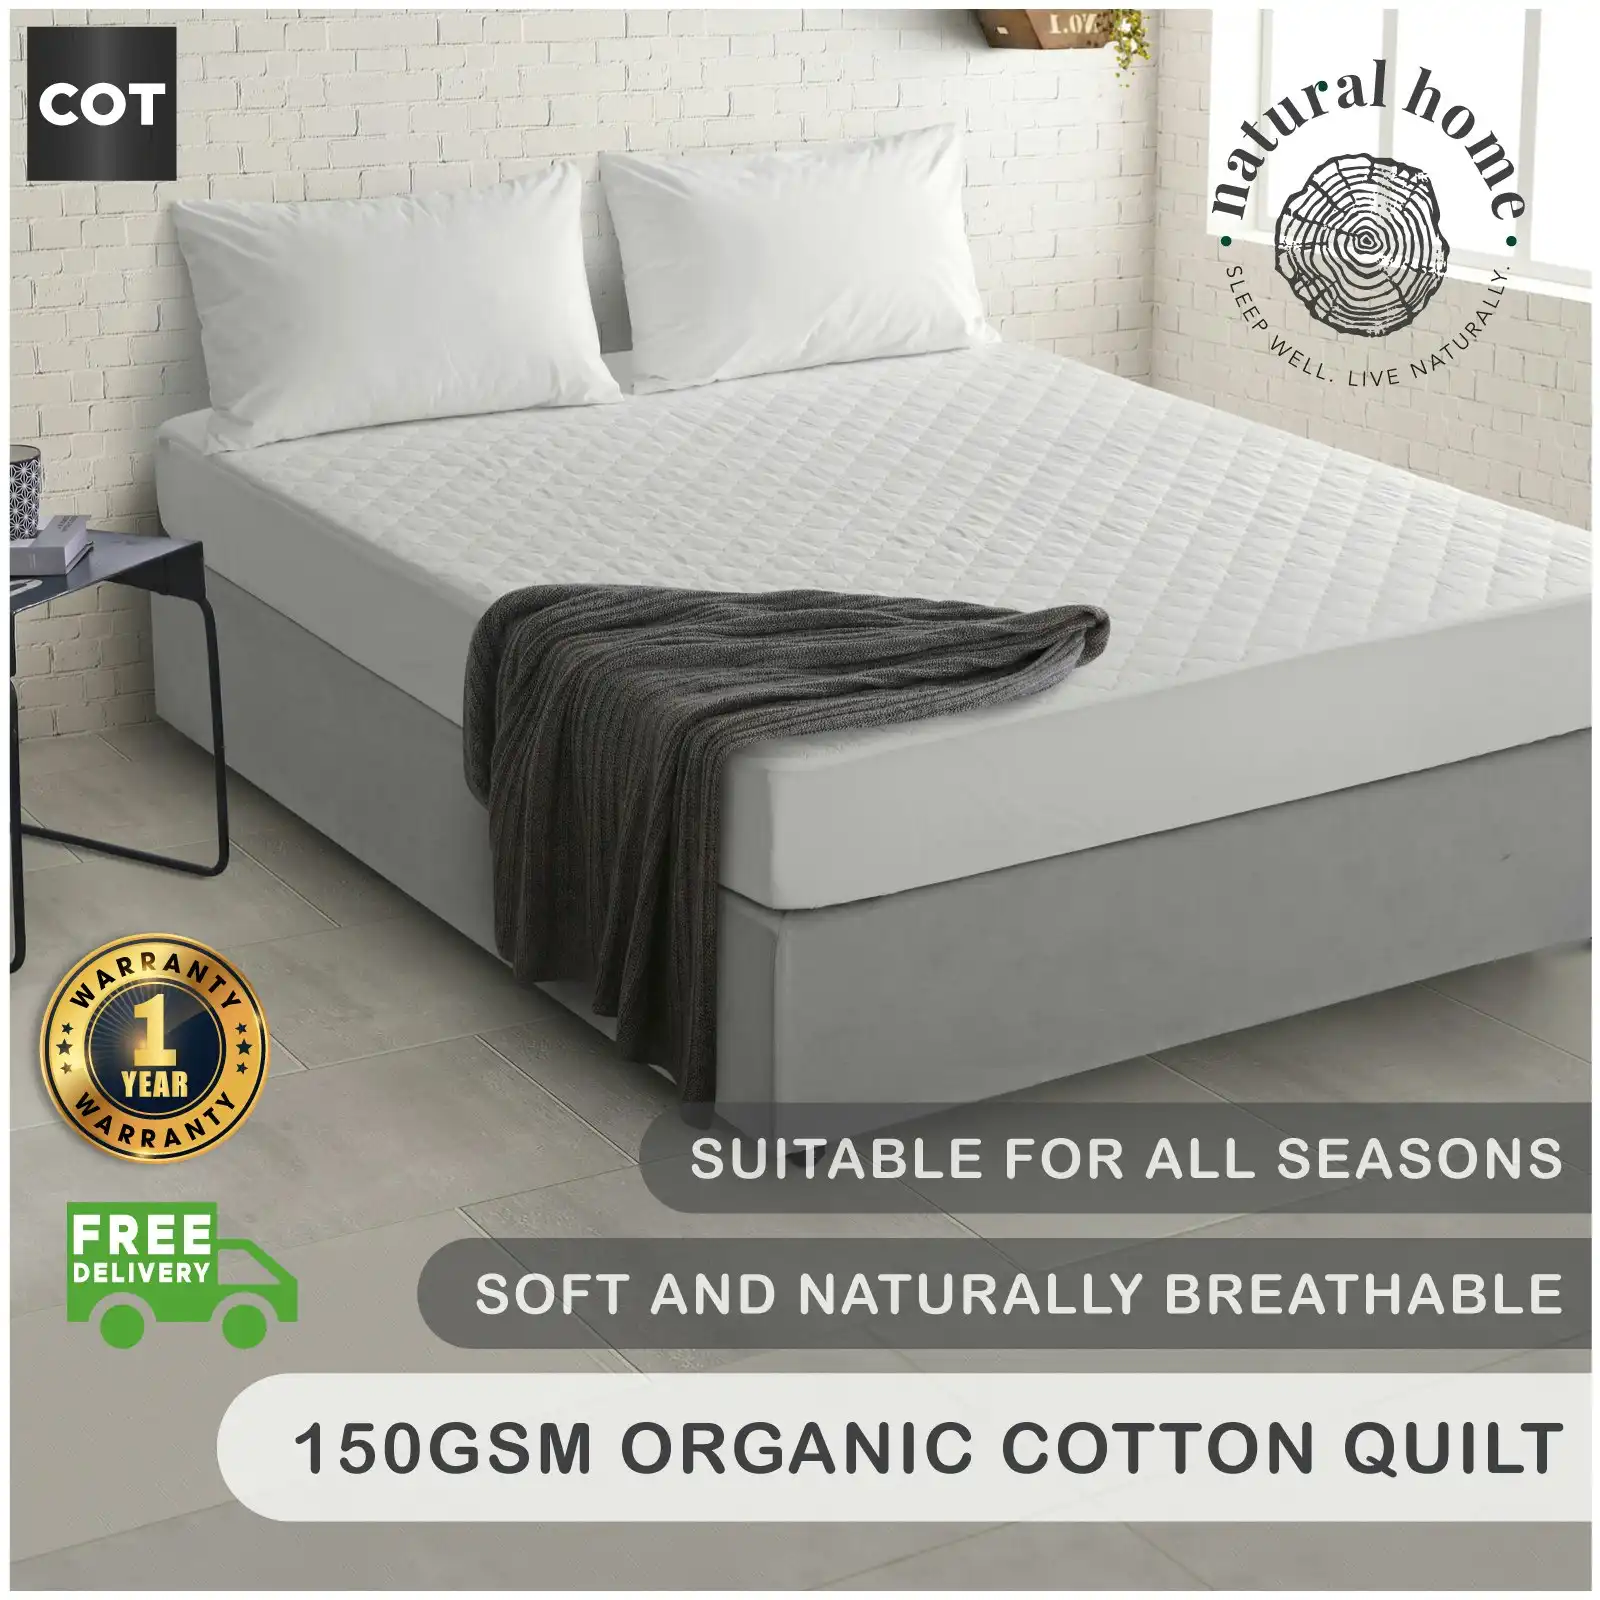 Natural Home Organic Cotton Quilted Mattress Protector White Cot